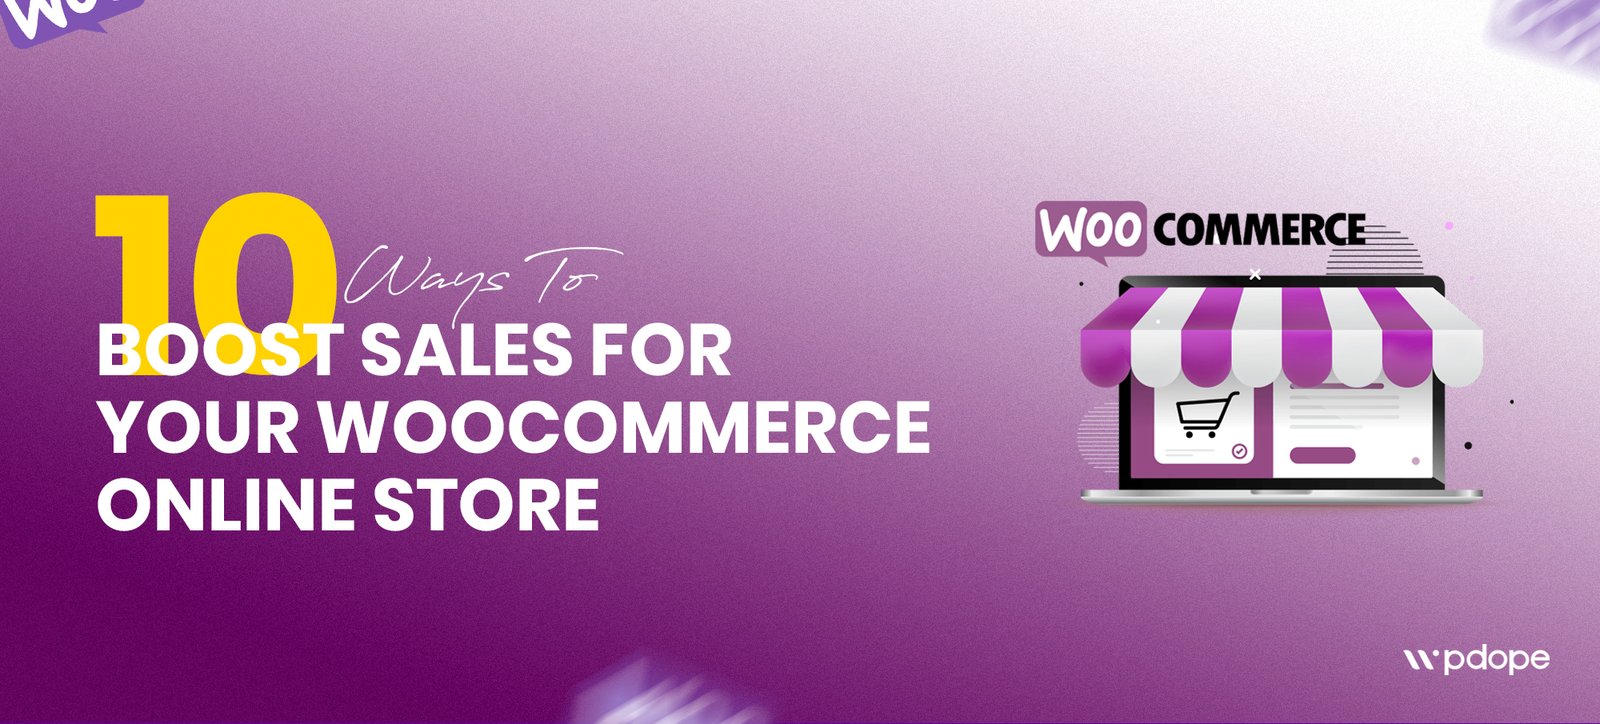 10 Ways to Boost Sales for Your WooCommerce Online Store